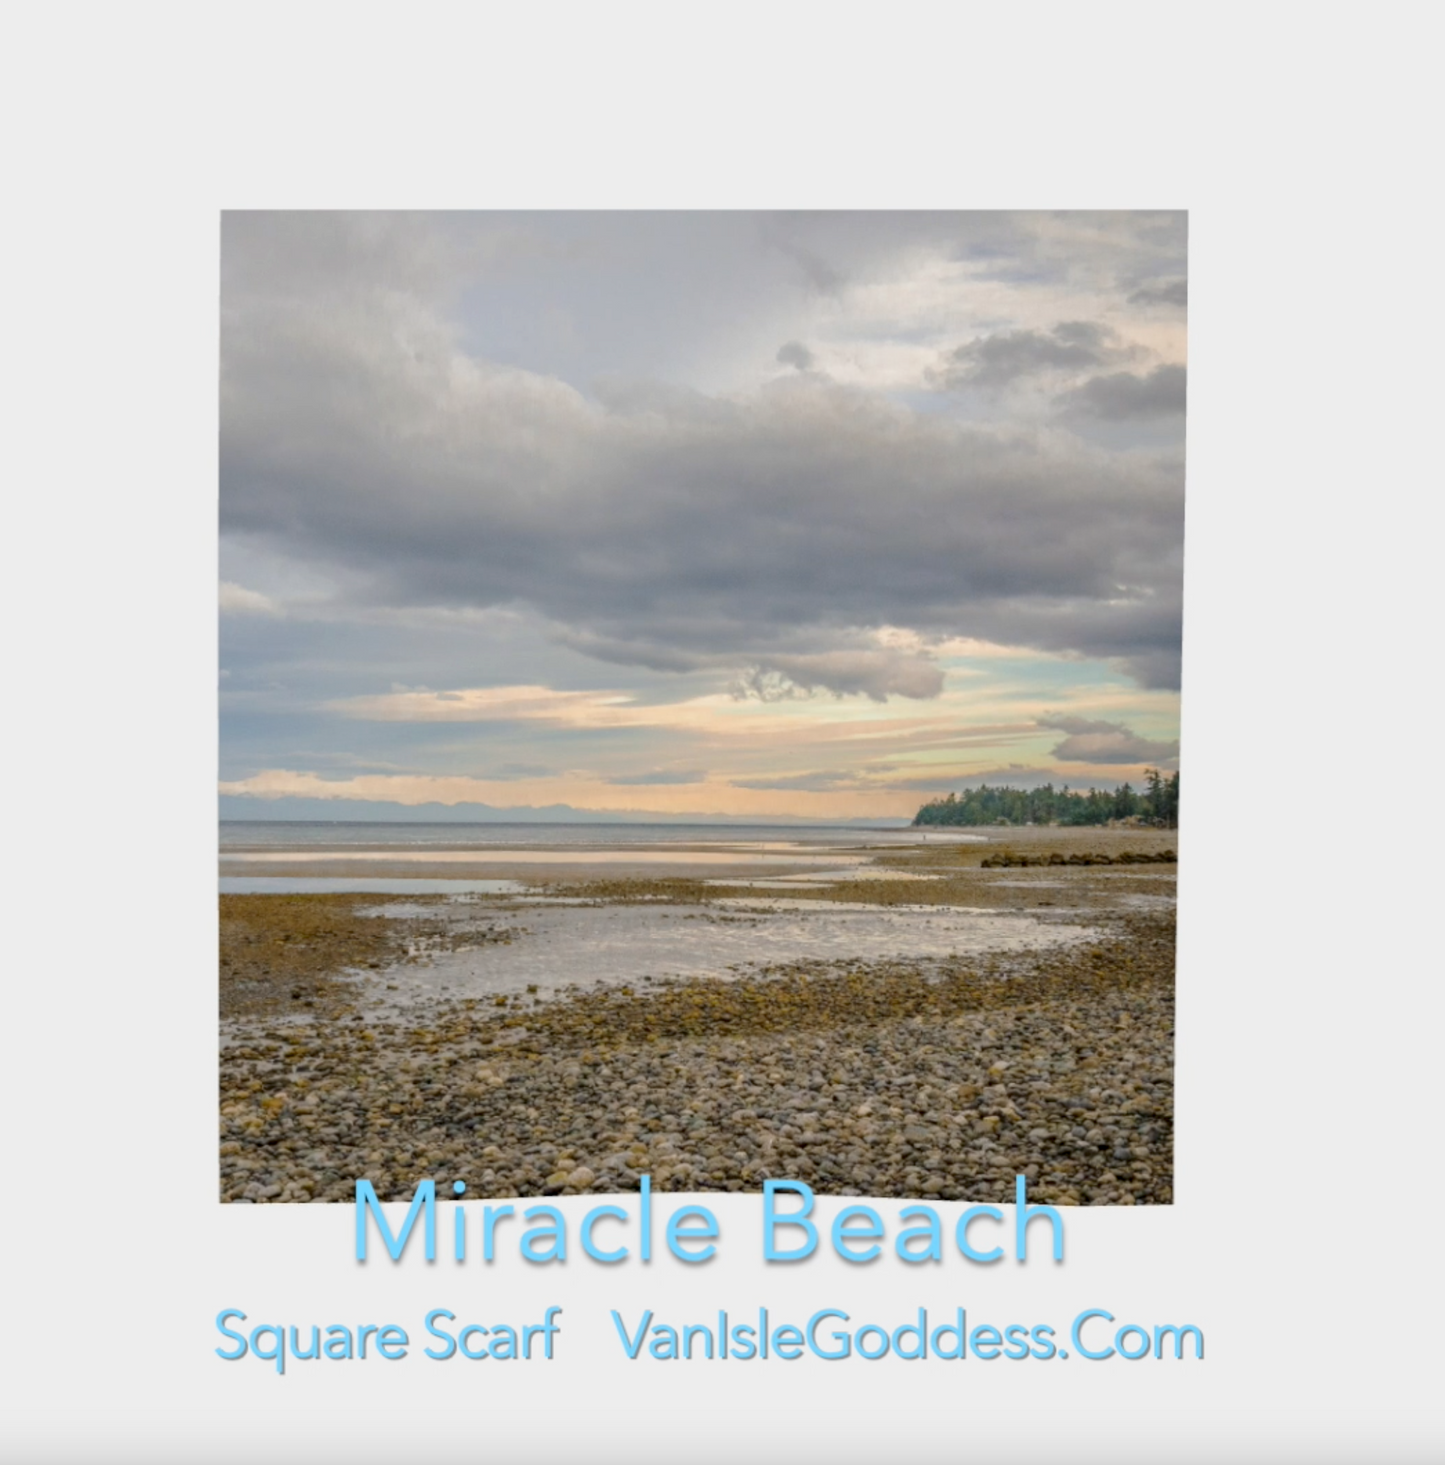 Miracle Beach square scarf shown full size.